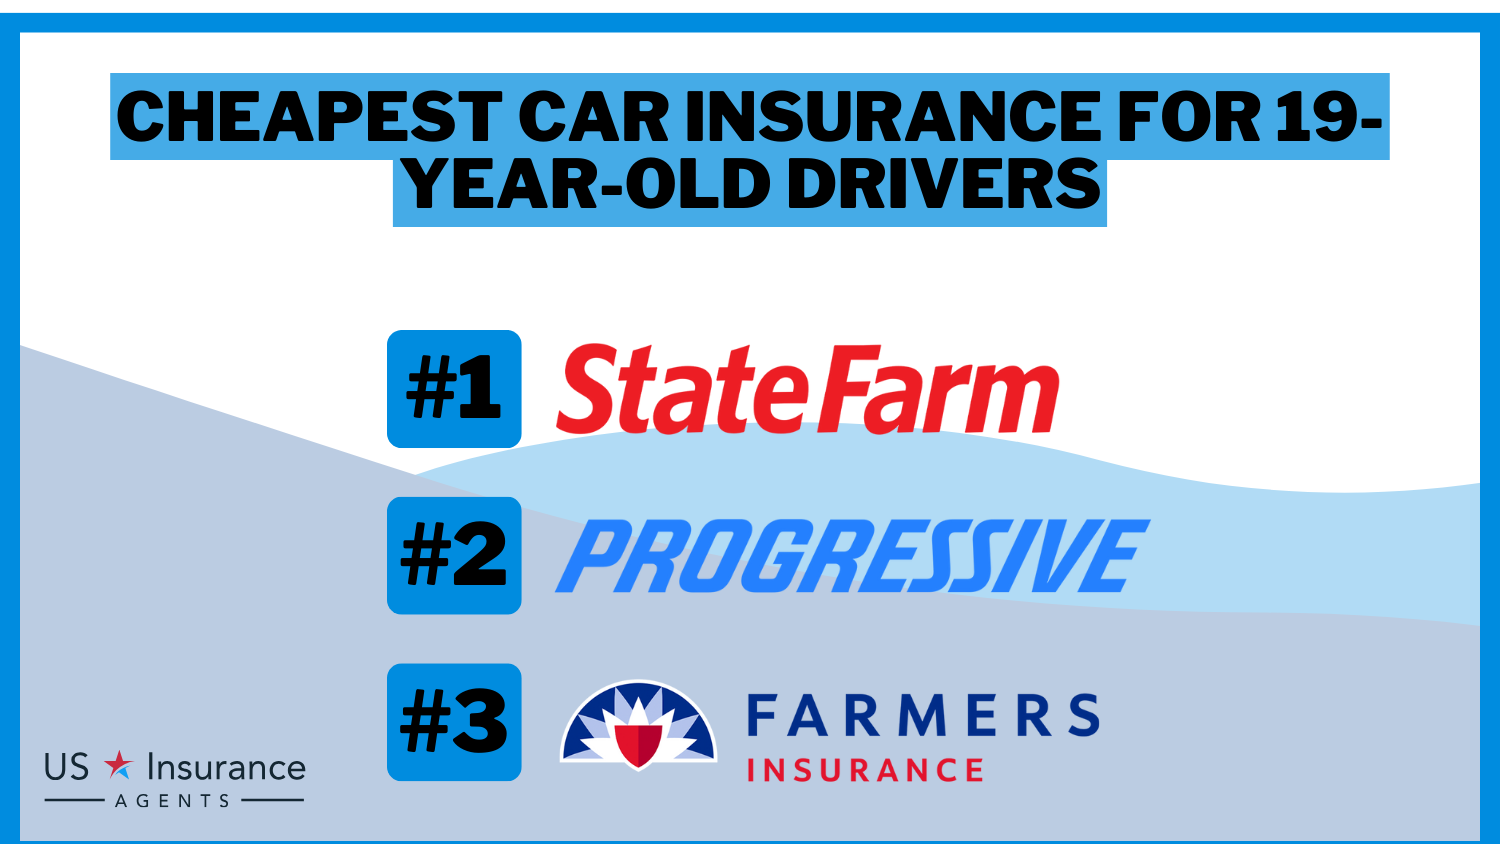 Cheapest Car Insurance for 19-Year-Old Drivers: State Farm, Progressive, and Farmers.